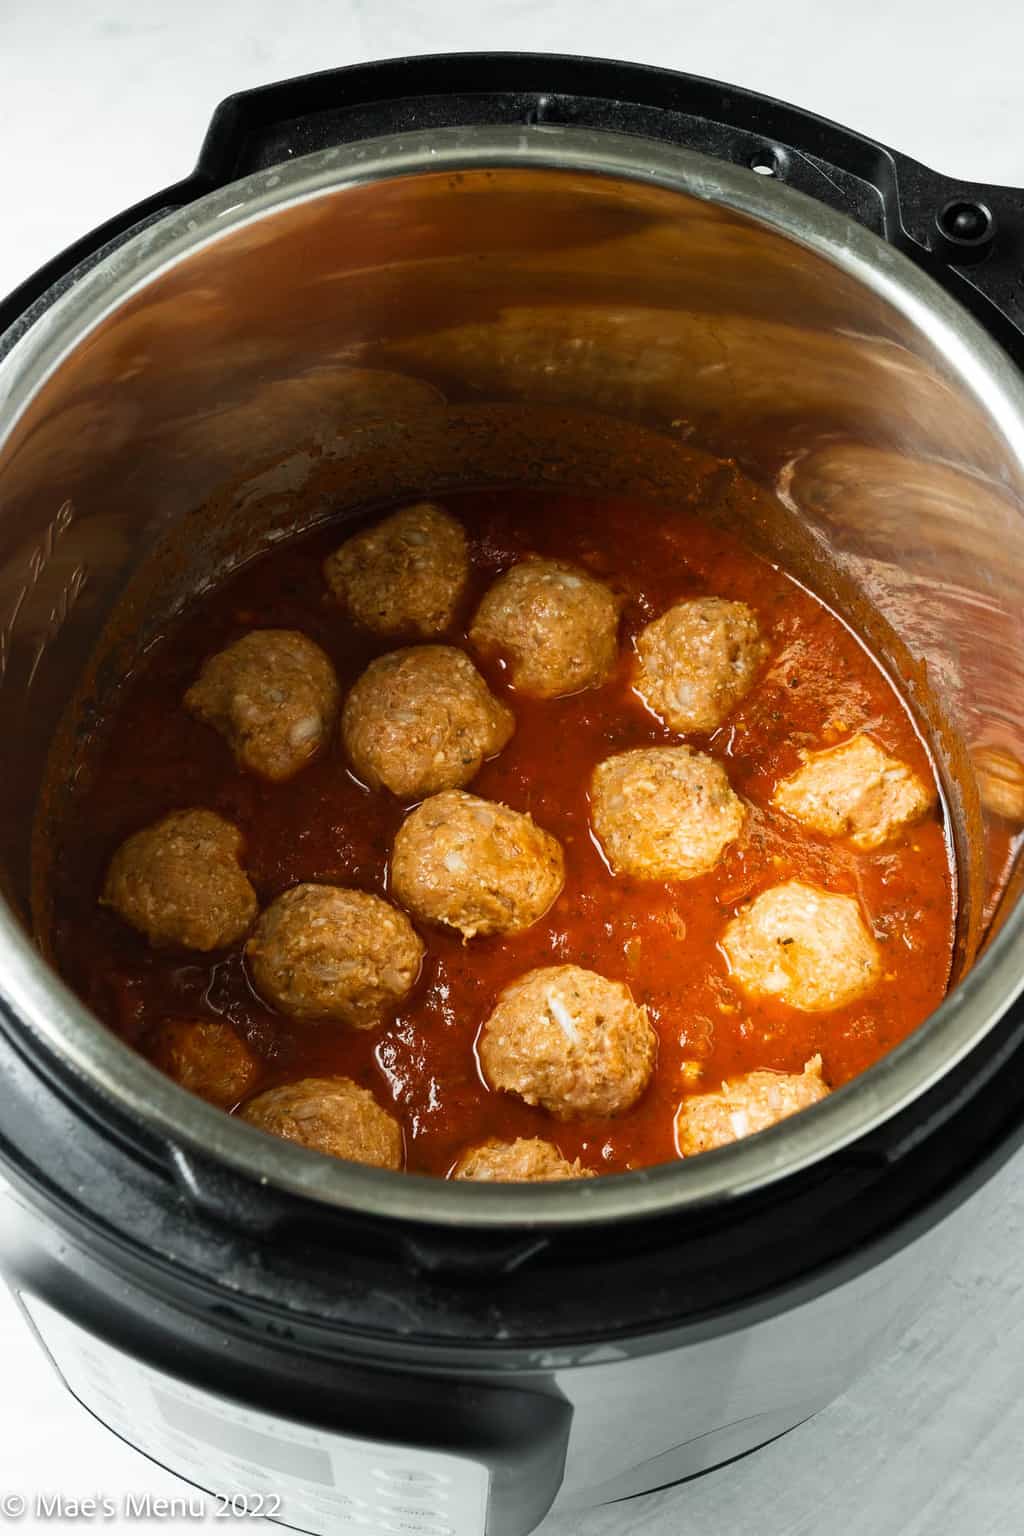 An instant pot of turkey meatballs resting in tomato sauce.